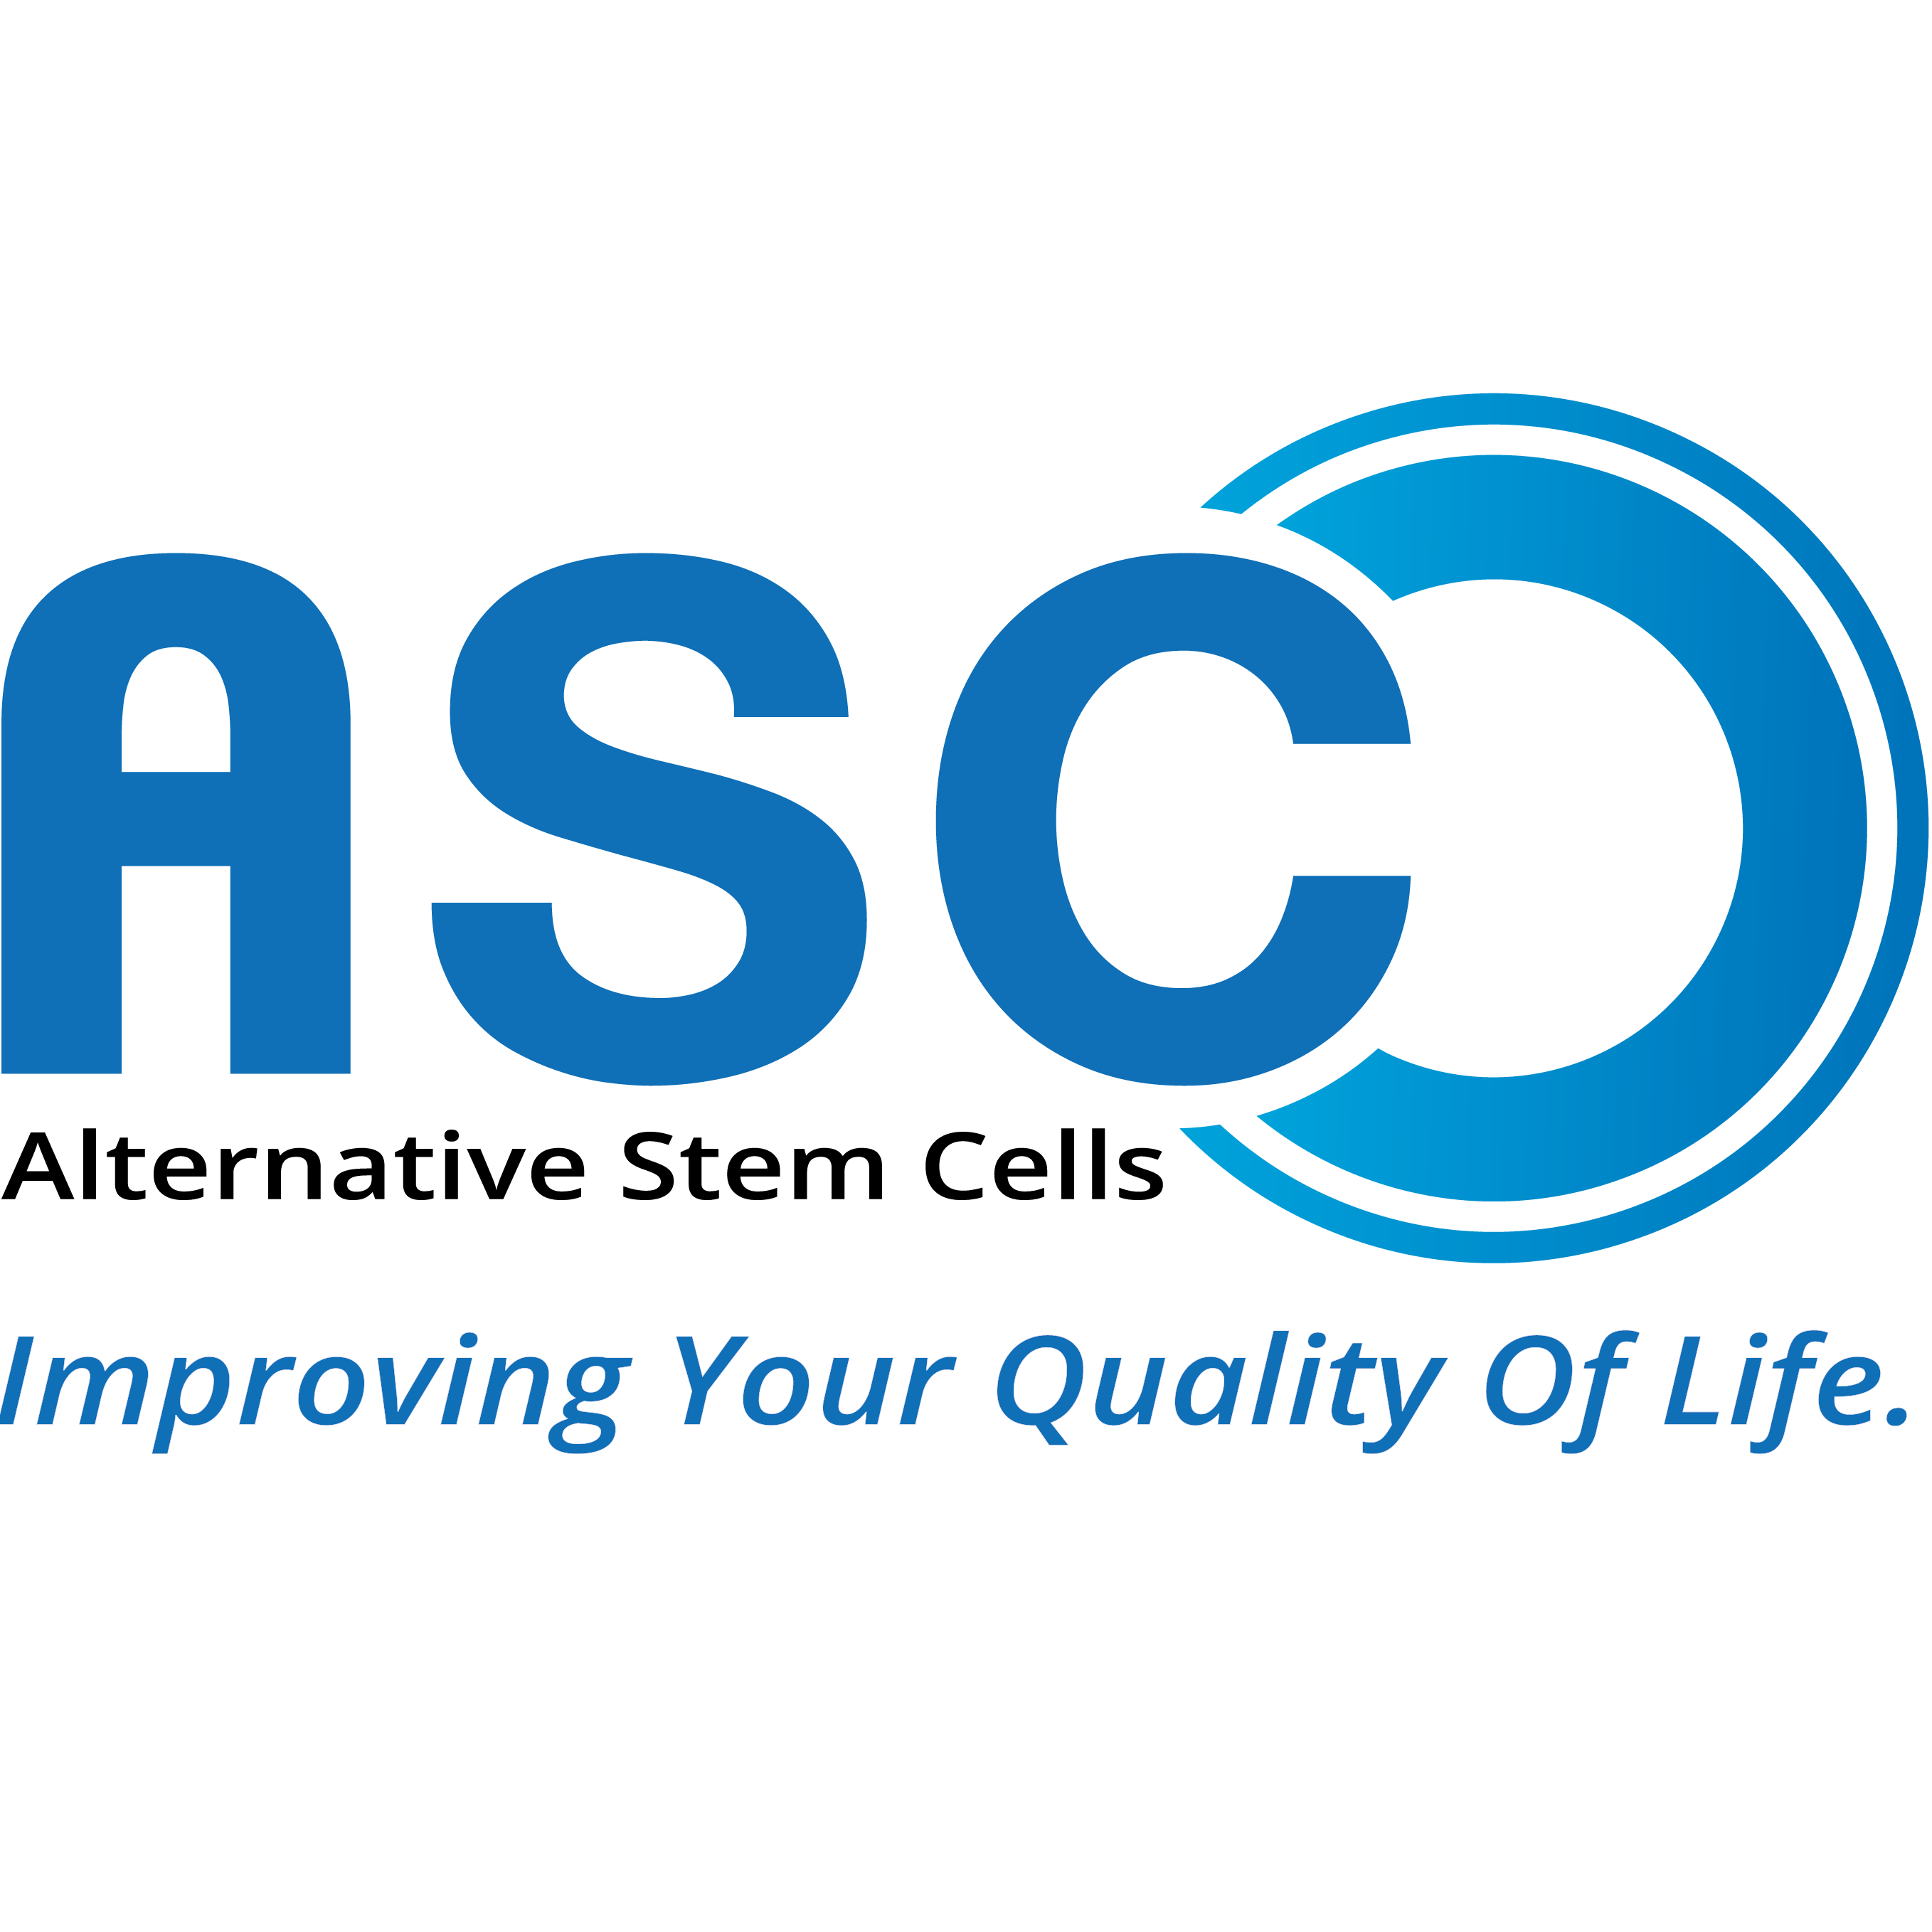 Helping you to fight & recover from ALS, Motor Neuron disease, Parkinsons disease, Cerebral palsy, Brain injury, MS & lost vision by using Stem Cell technology